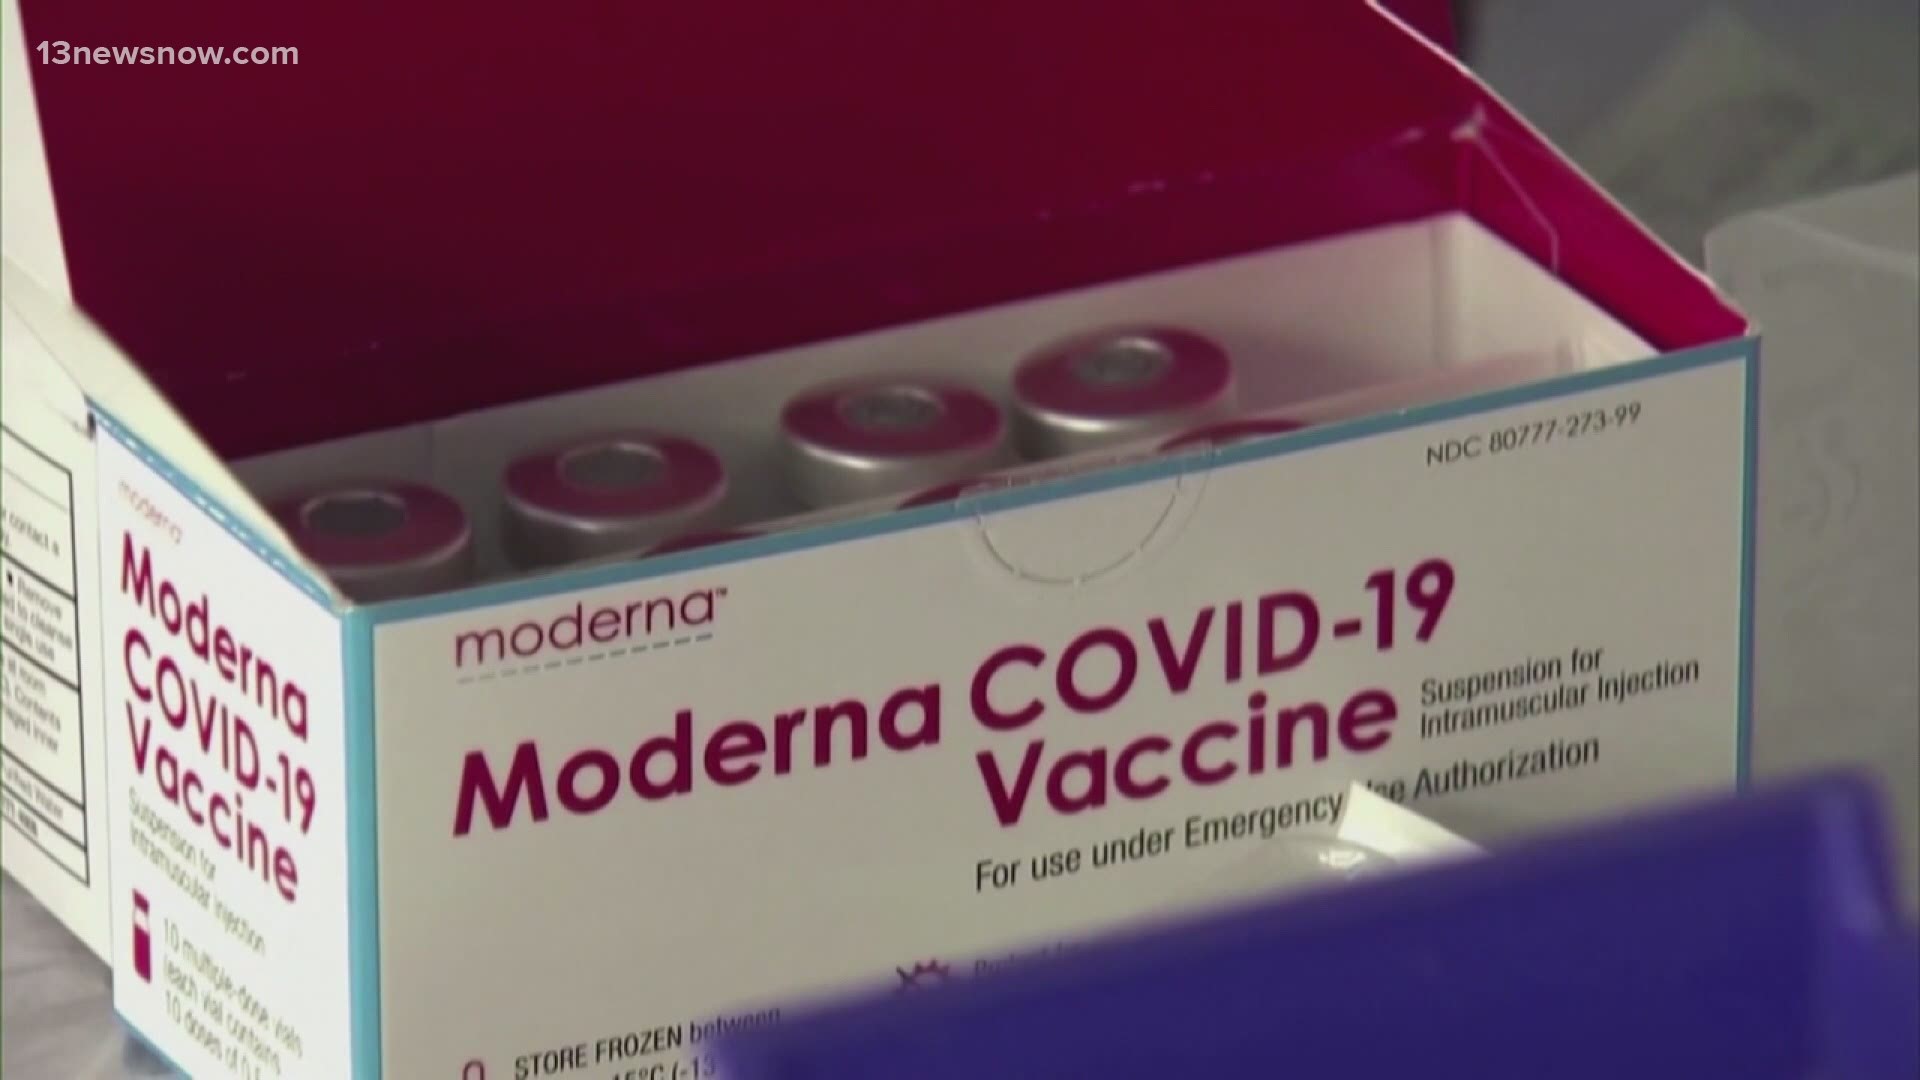 The Three Rivers Health District moved to Phase 1c of Virginia's COVID-19 vaccine distribution plan, expanding vaccinations to move essential workers.